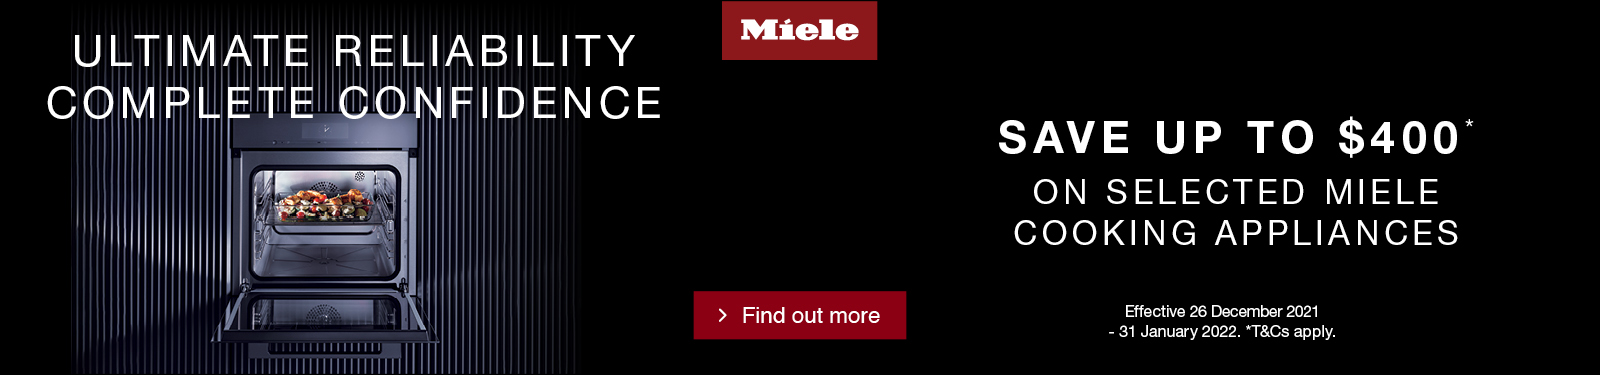 Save Up To $400 On Miele Cooking